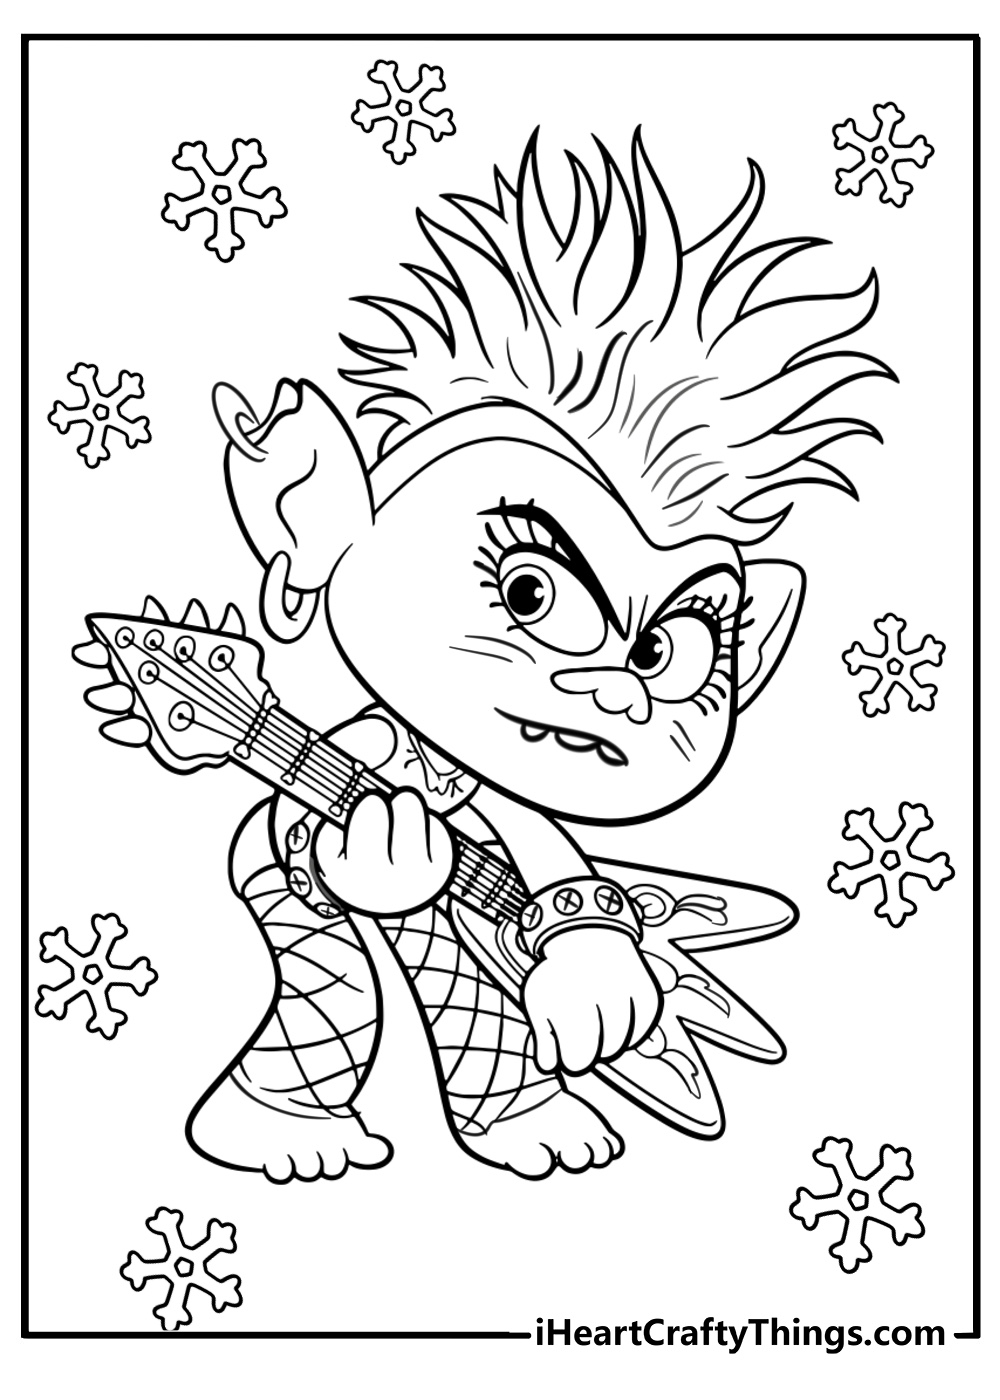 Queen Barb troll playing guitar during world tour coloring page